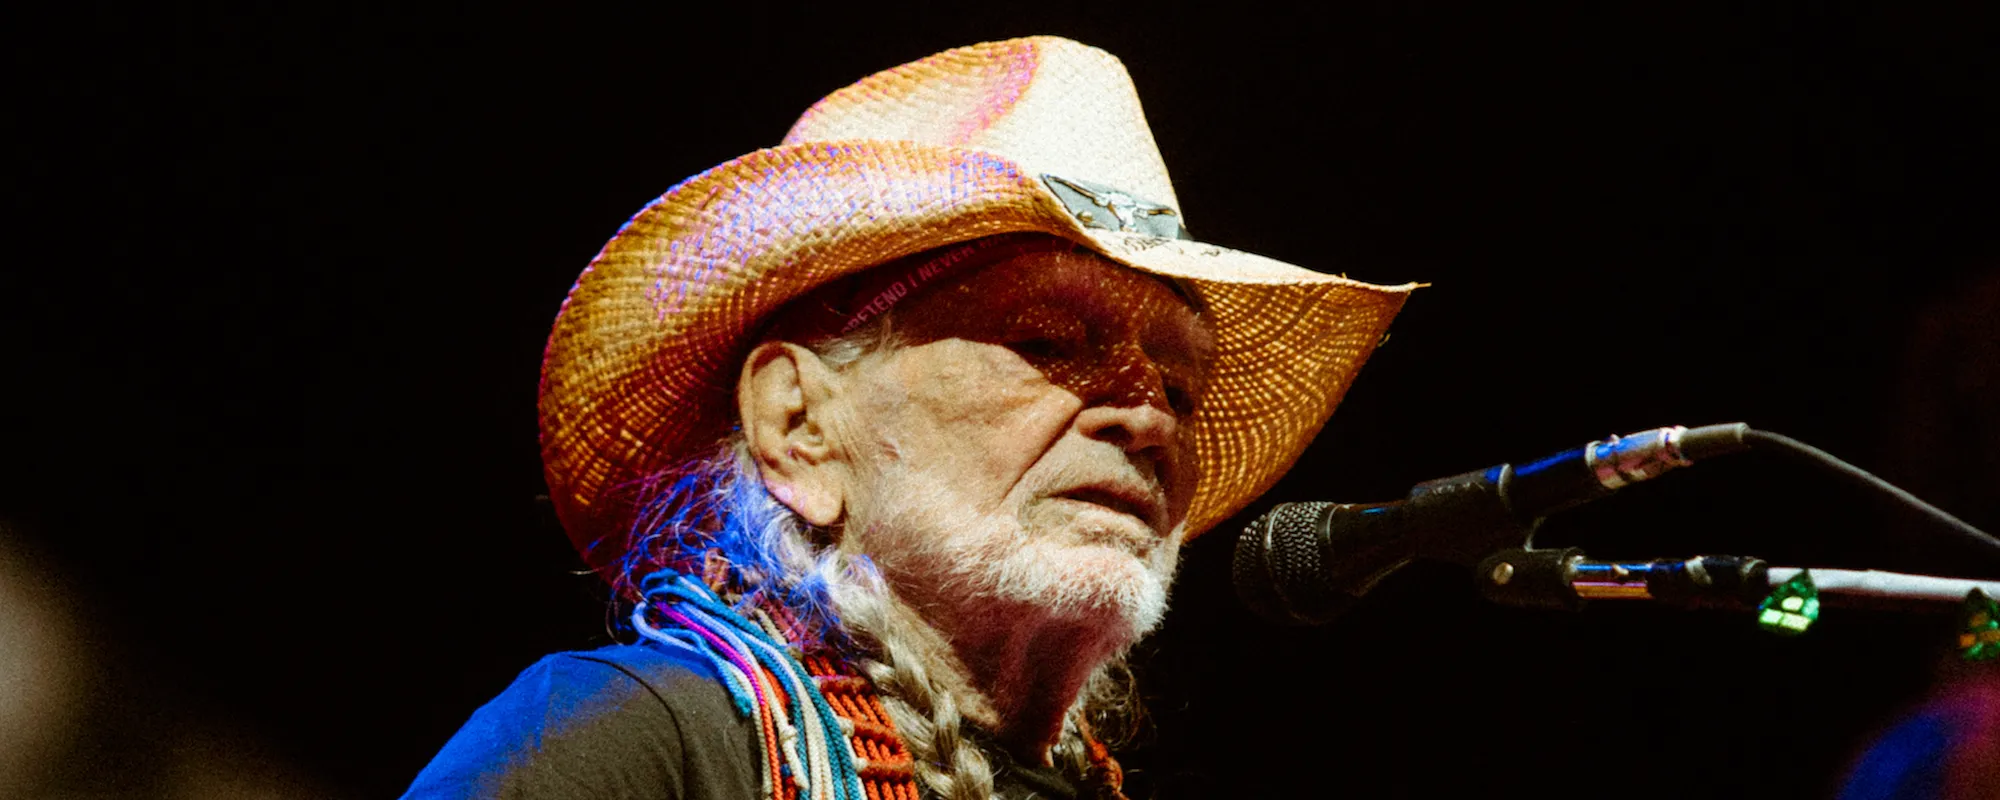 Willie Nelson Set to Play Beto O’Rourke Rally Sunday in Austin, Texas